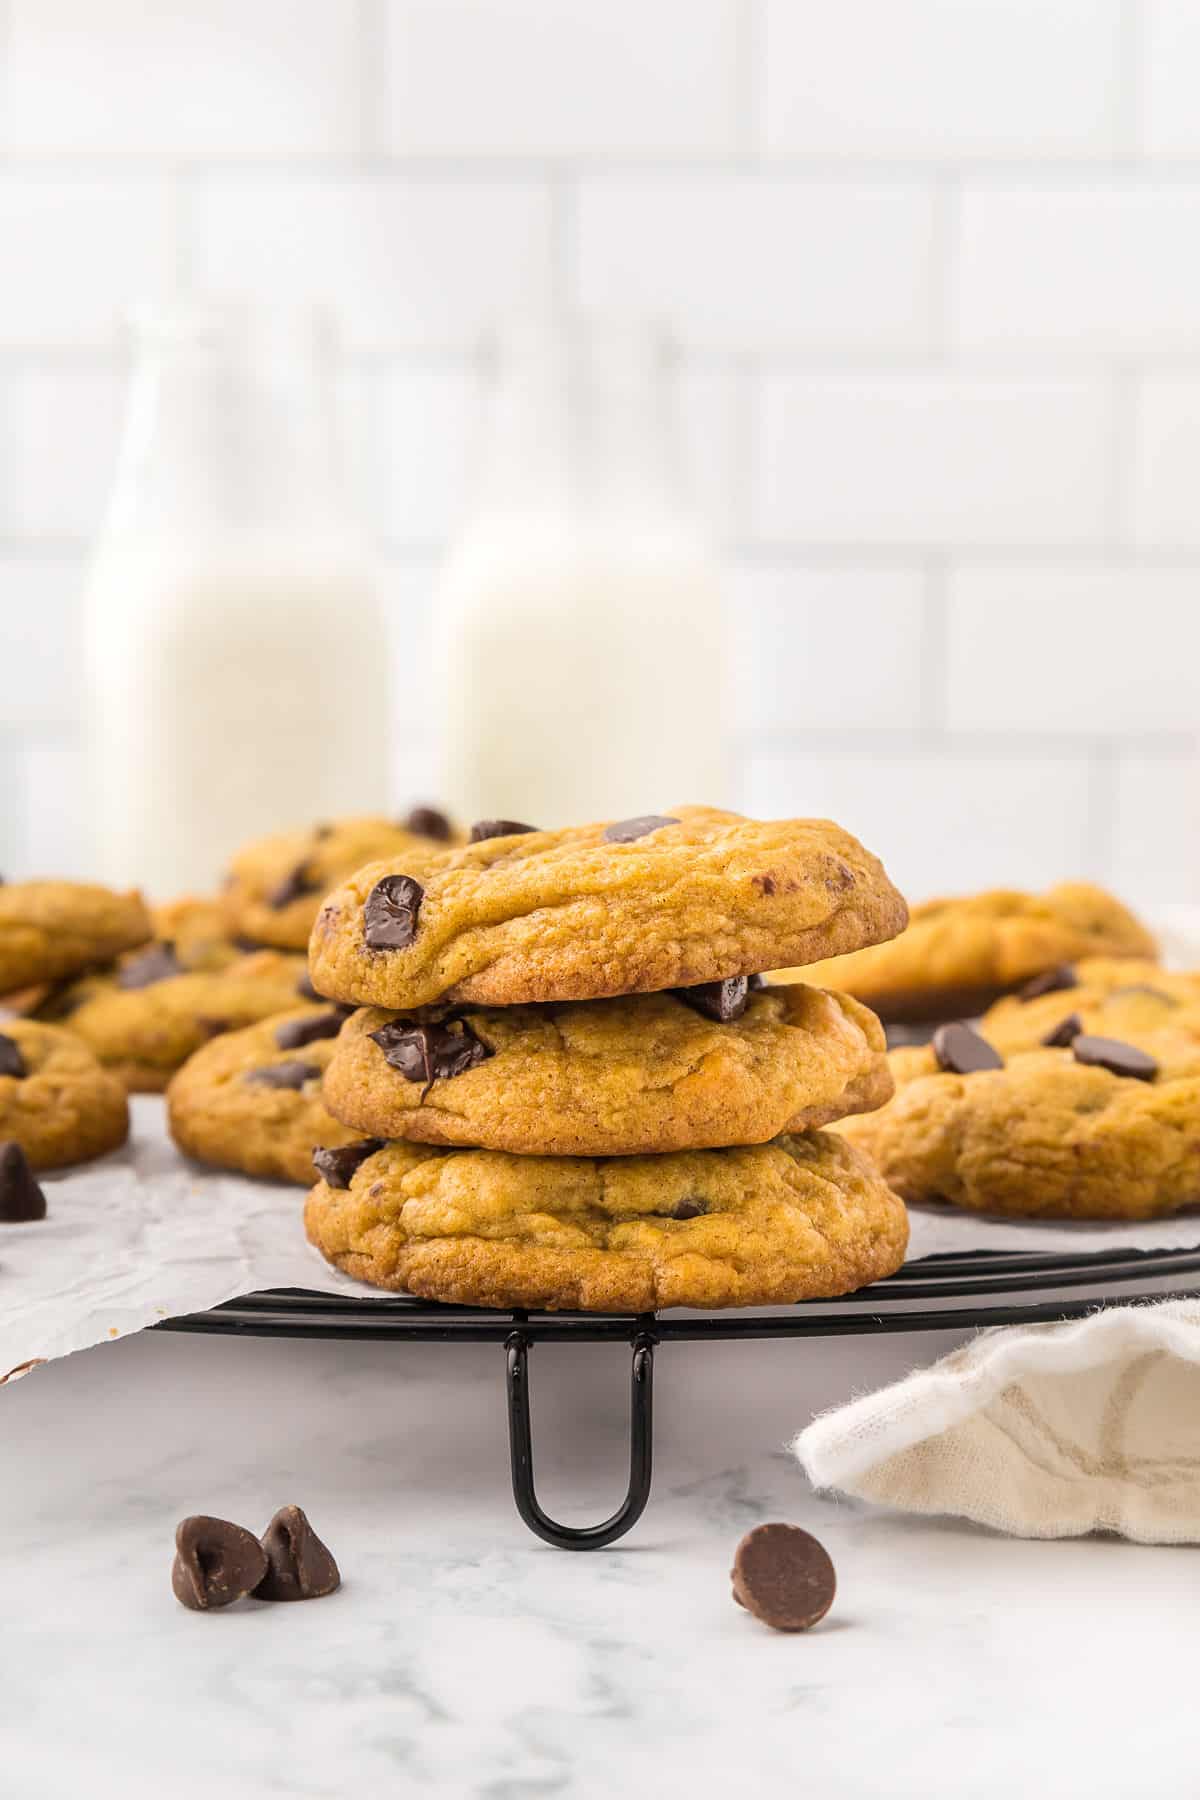 Pumpkin chocolate chip cookies on the table with three stacked on top of each other in front of more on a wire rack.